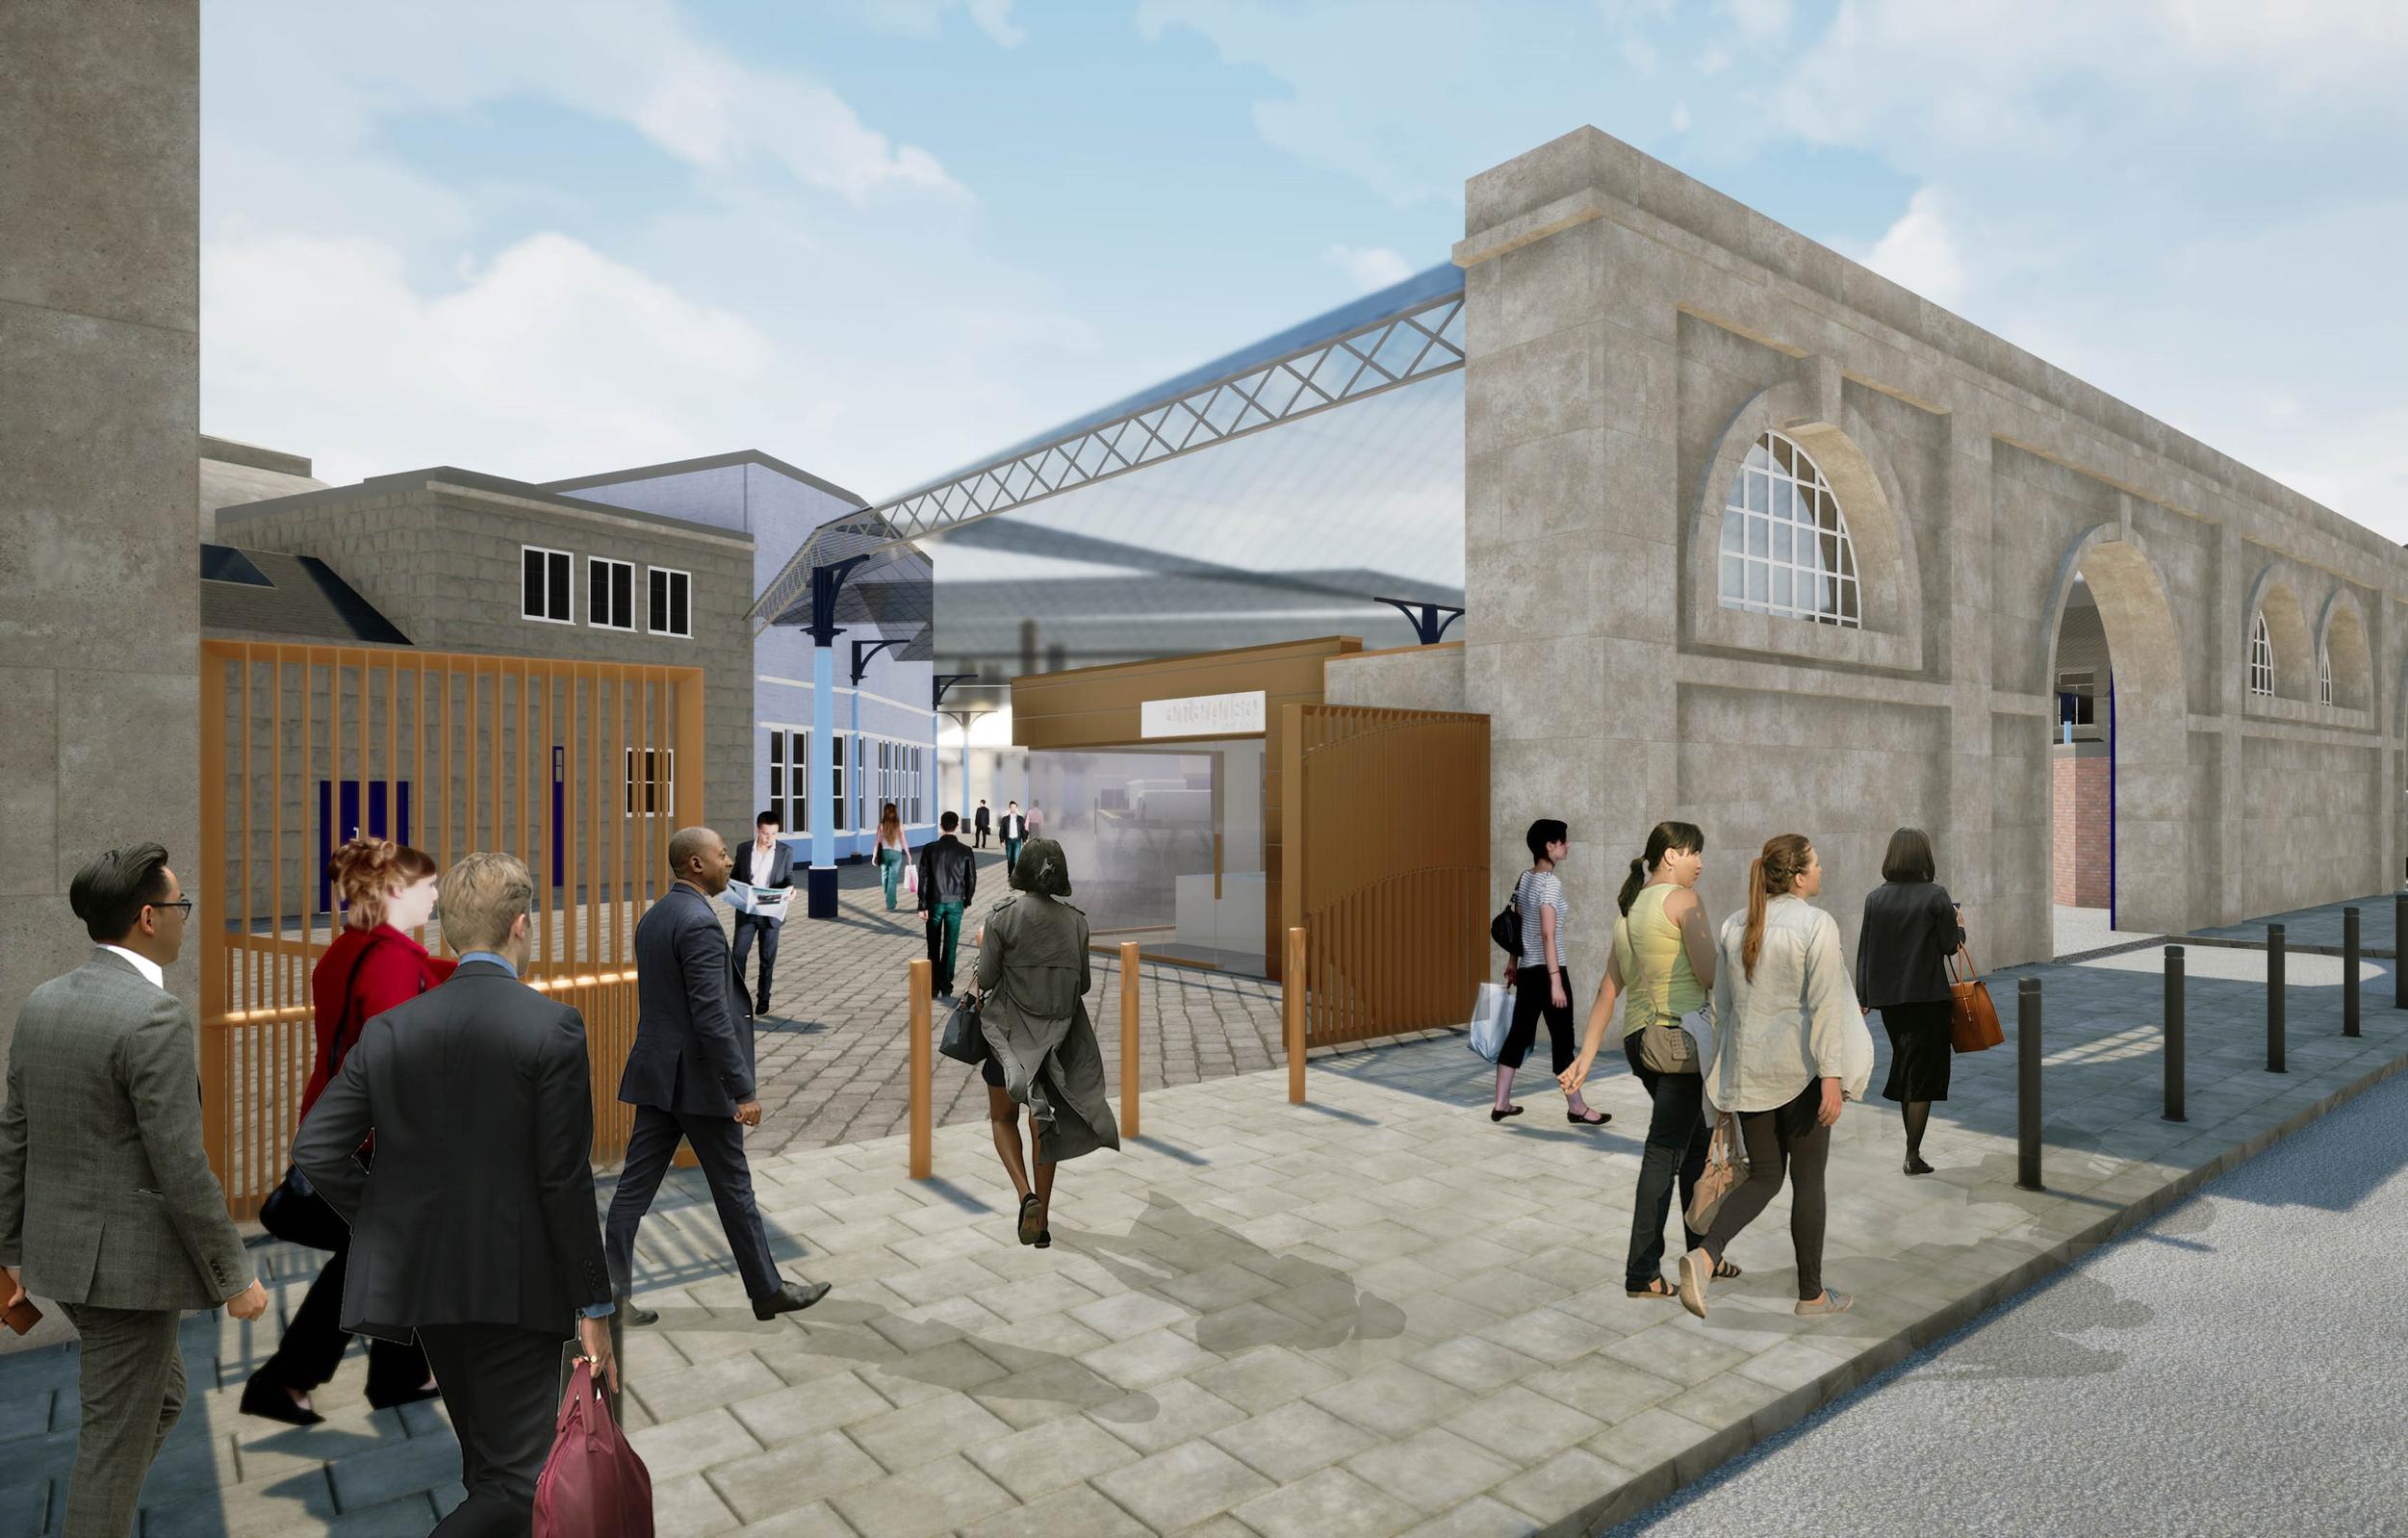 The improvements planned at Newcastle Central